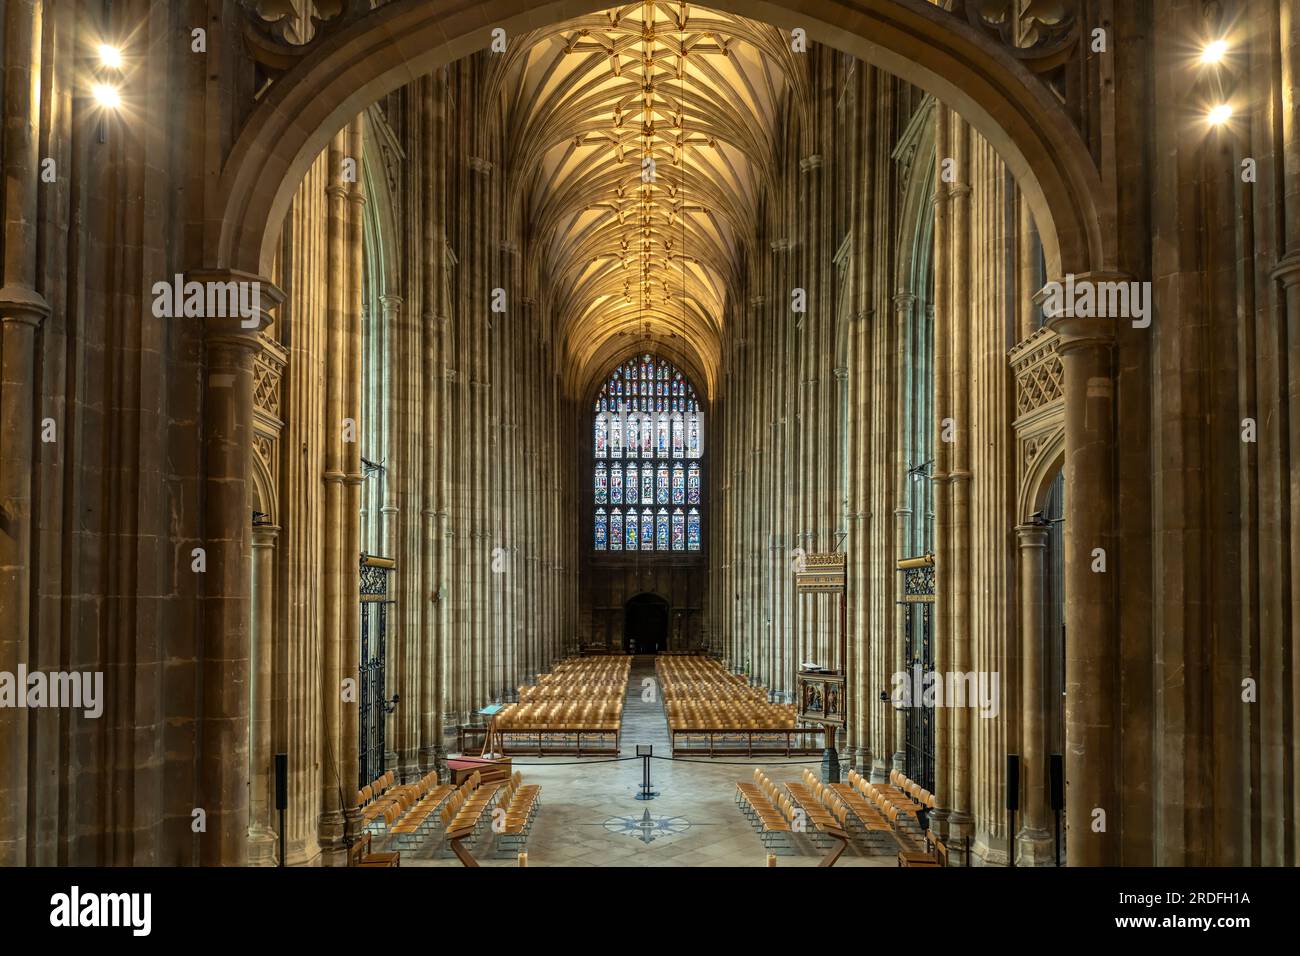 Kirchenschiff der Kathedrale von Canterbury, England, Großbritannien, Europa | nave of the Canterbury Cathedral, England, United Kingdom of Great BR Foto Stock